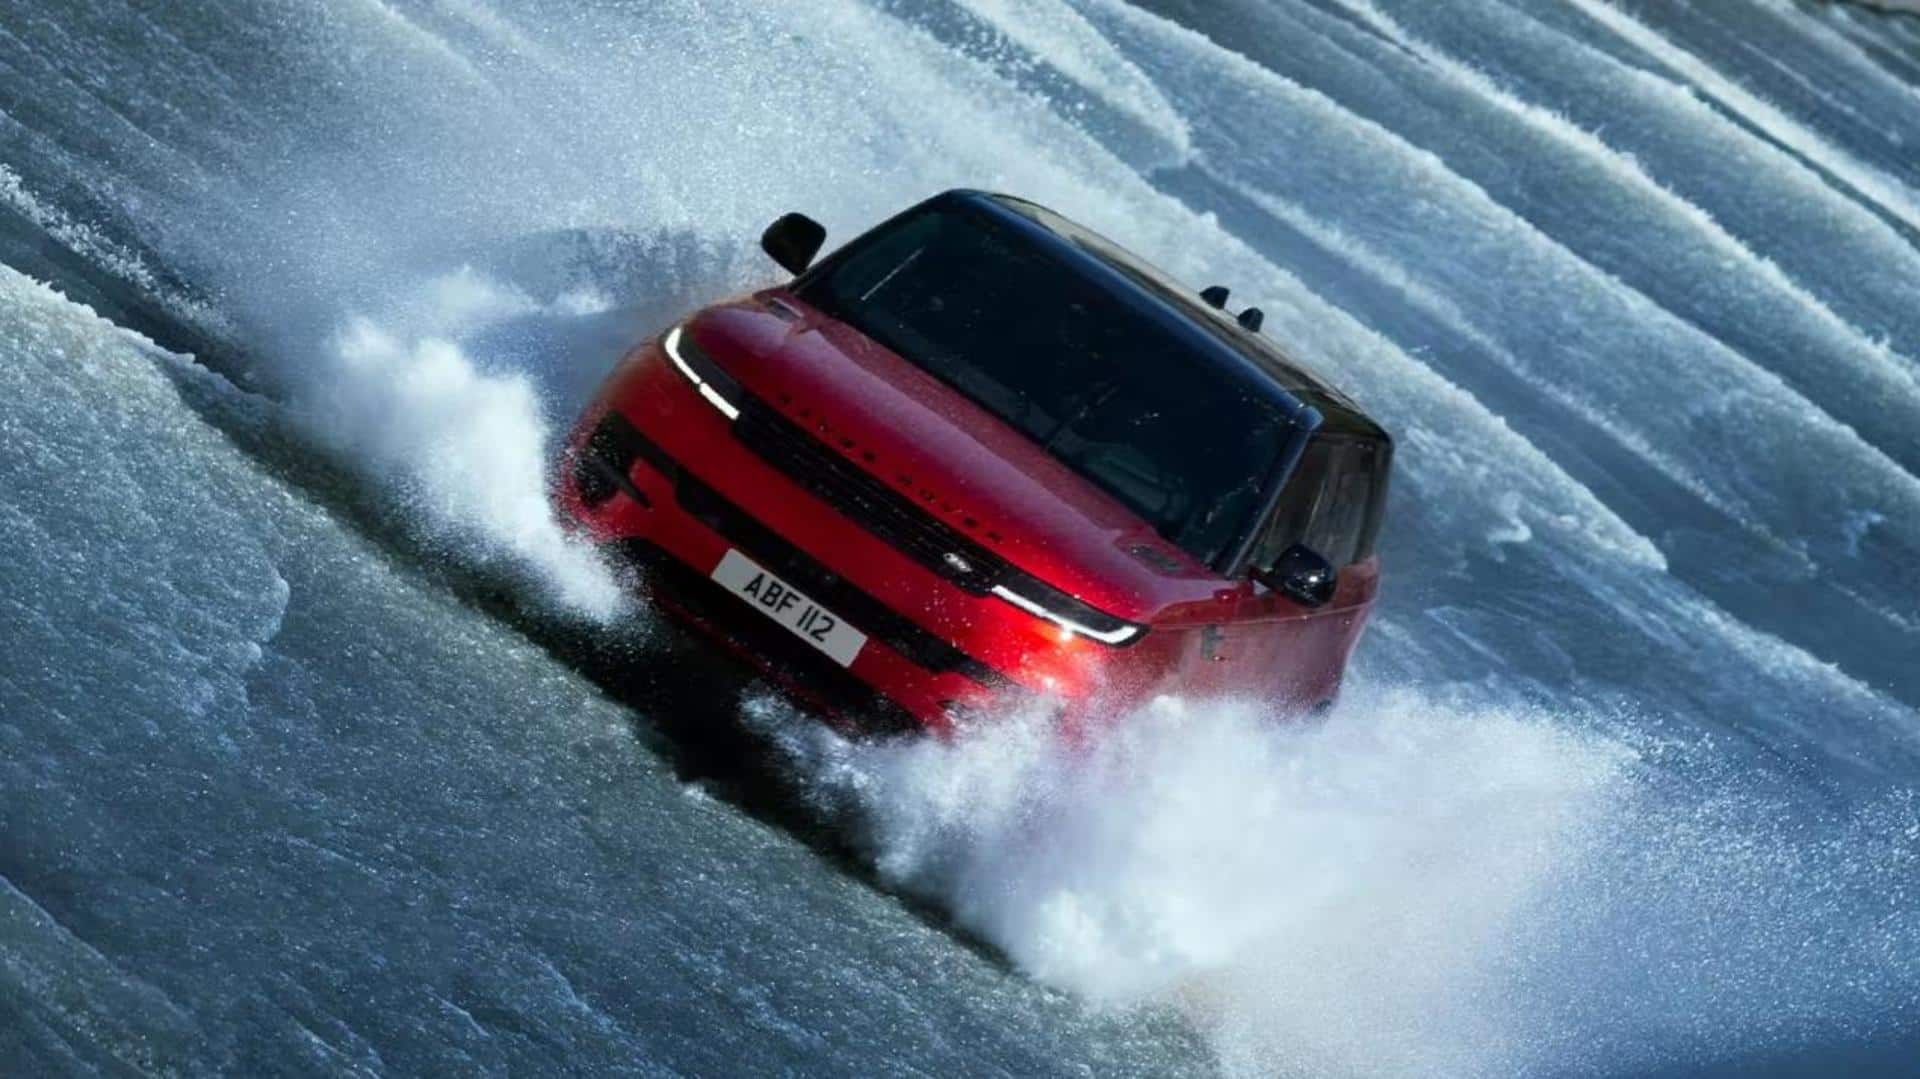 Range Rover Sport SV in the works: What to expect